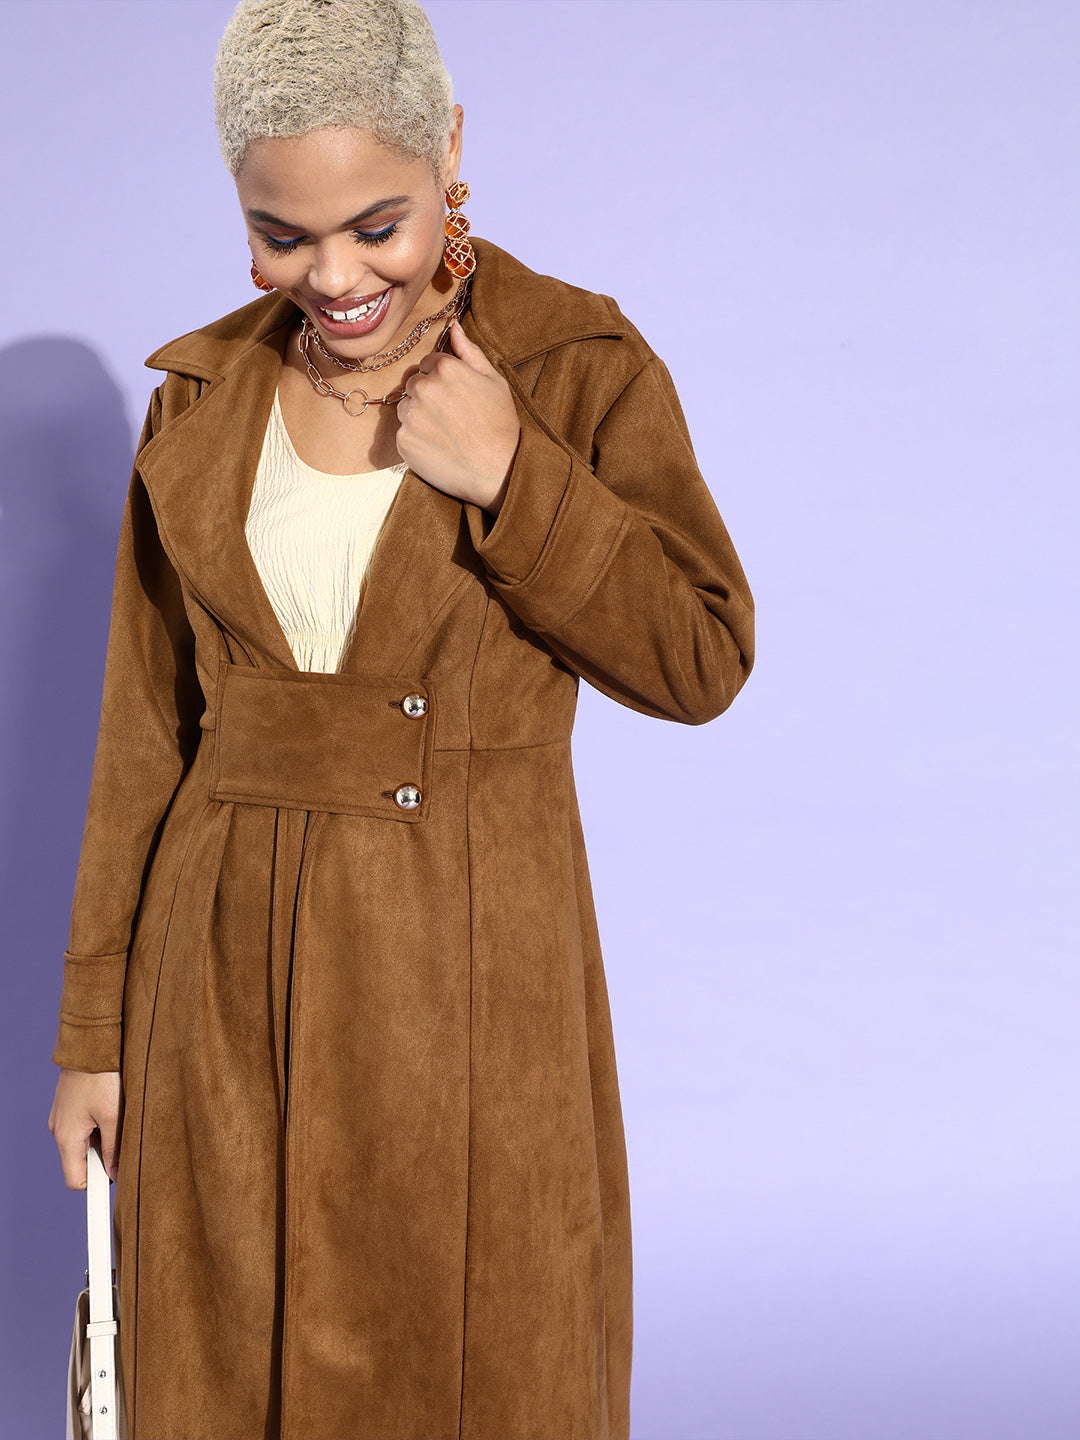 Athena Brown suede Trench-coat with waist lapel and pocket details - Athena Lifestyle